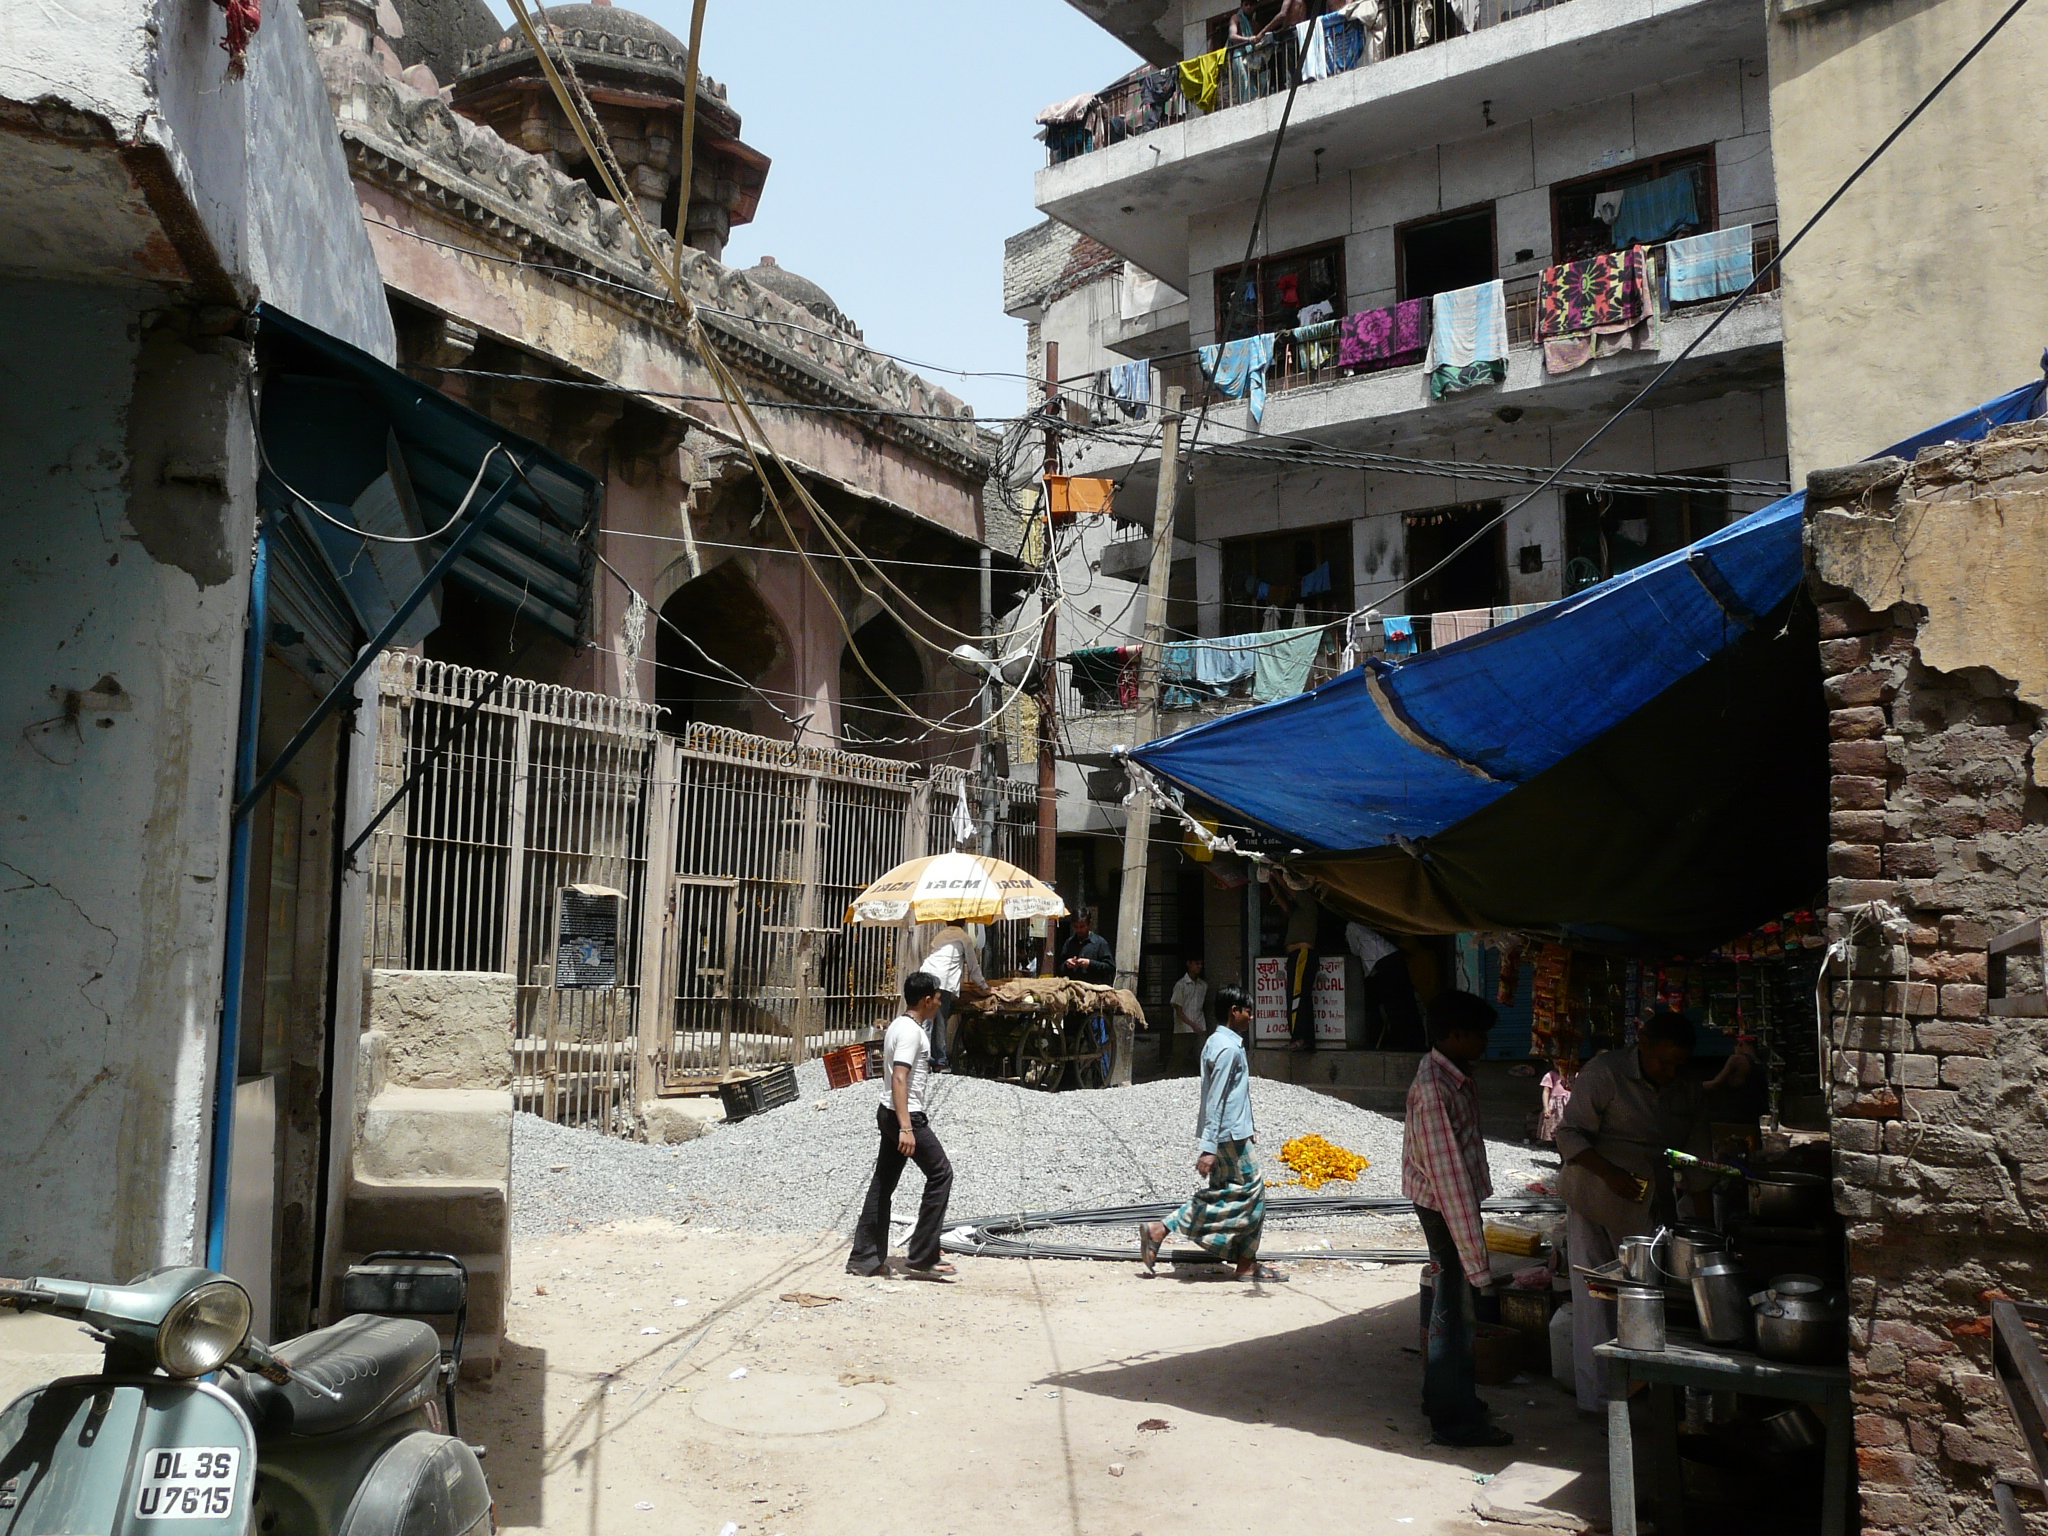 a small dirt street in front of a building with people standing and hanging out on it